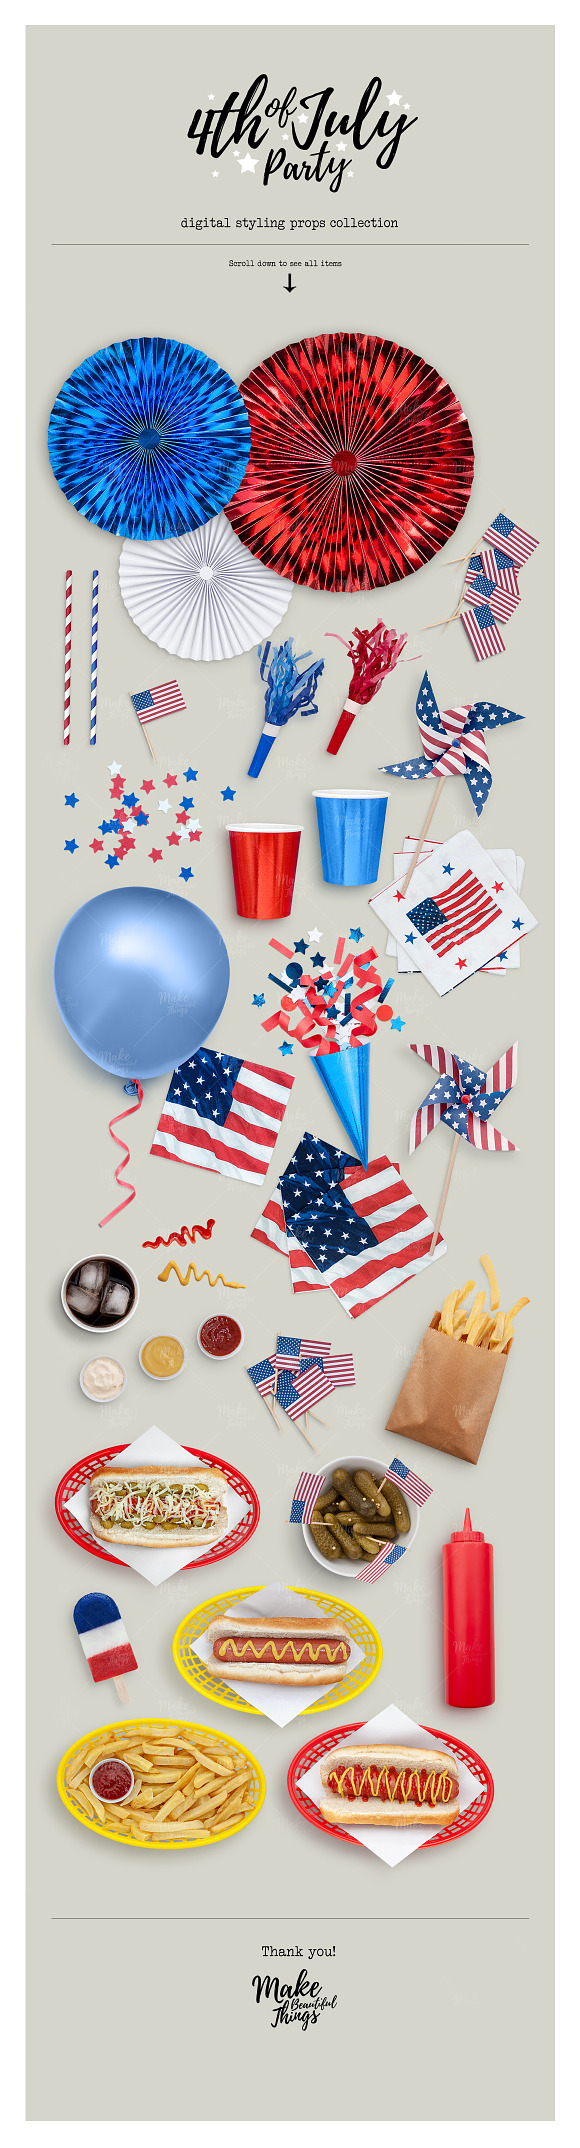 4th of July Styling Props in Scene Creator Mockups - product preview 1